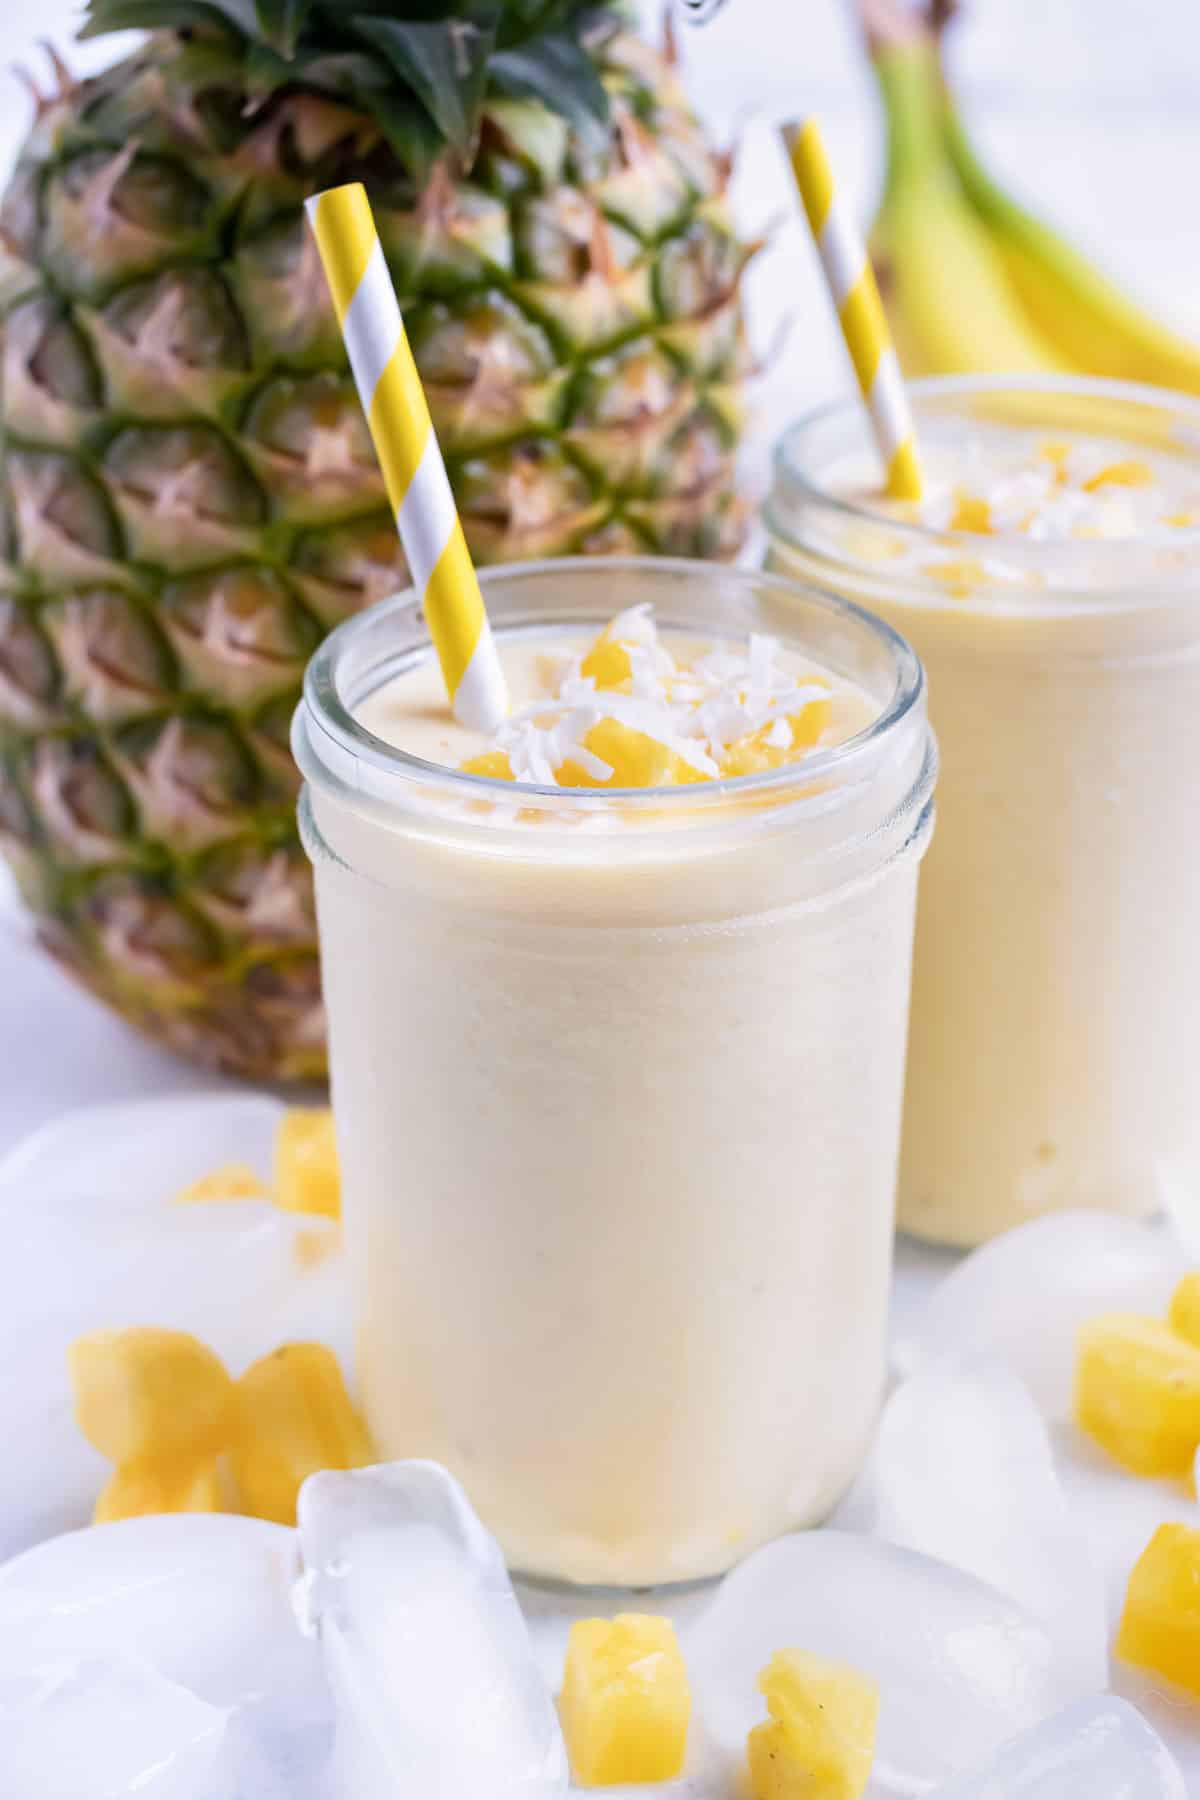 5-Minute Pineapple Coconut Smoothie